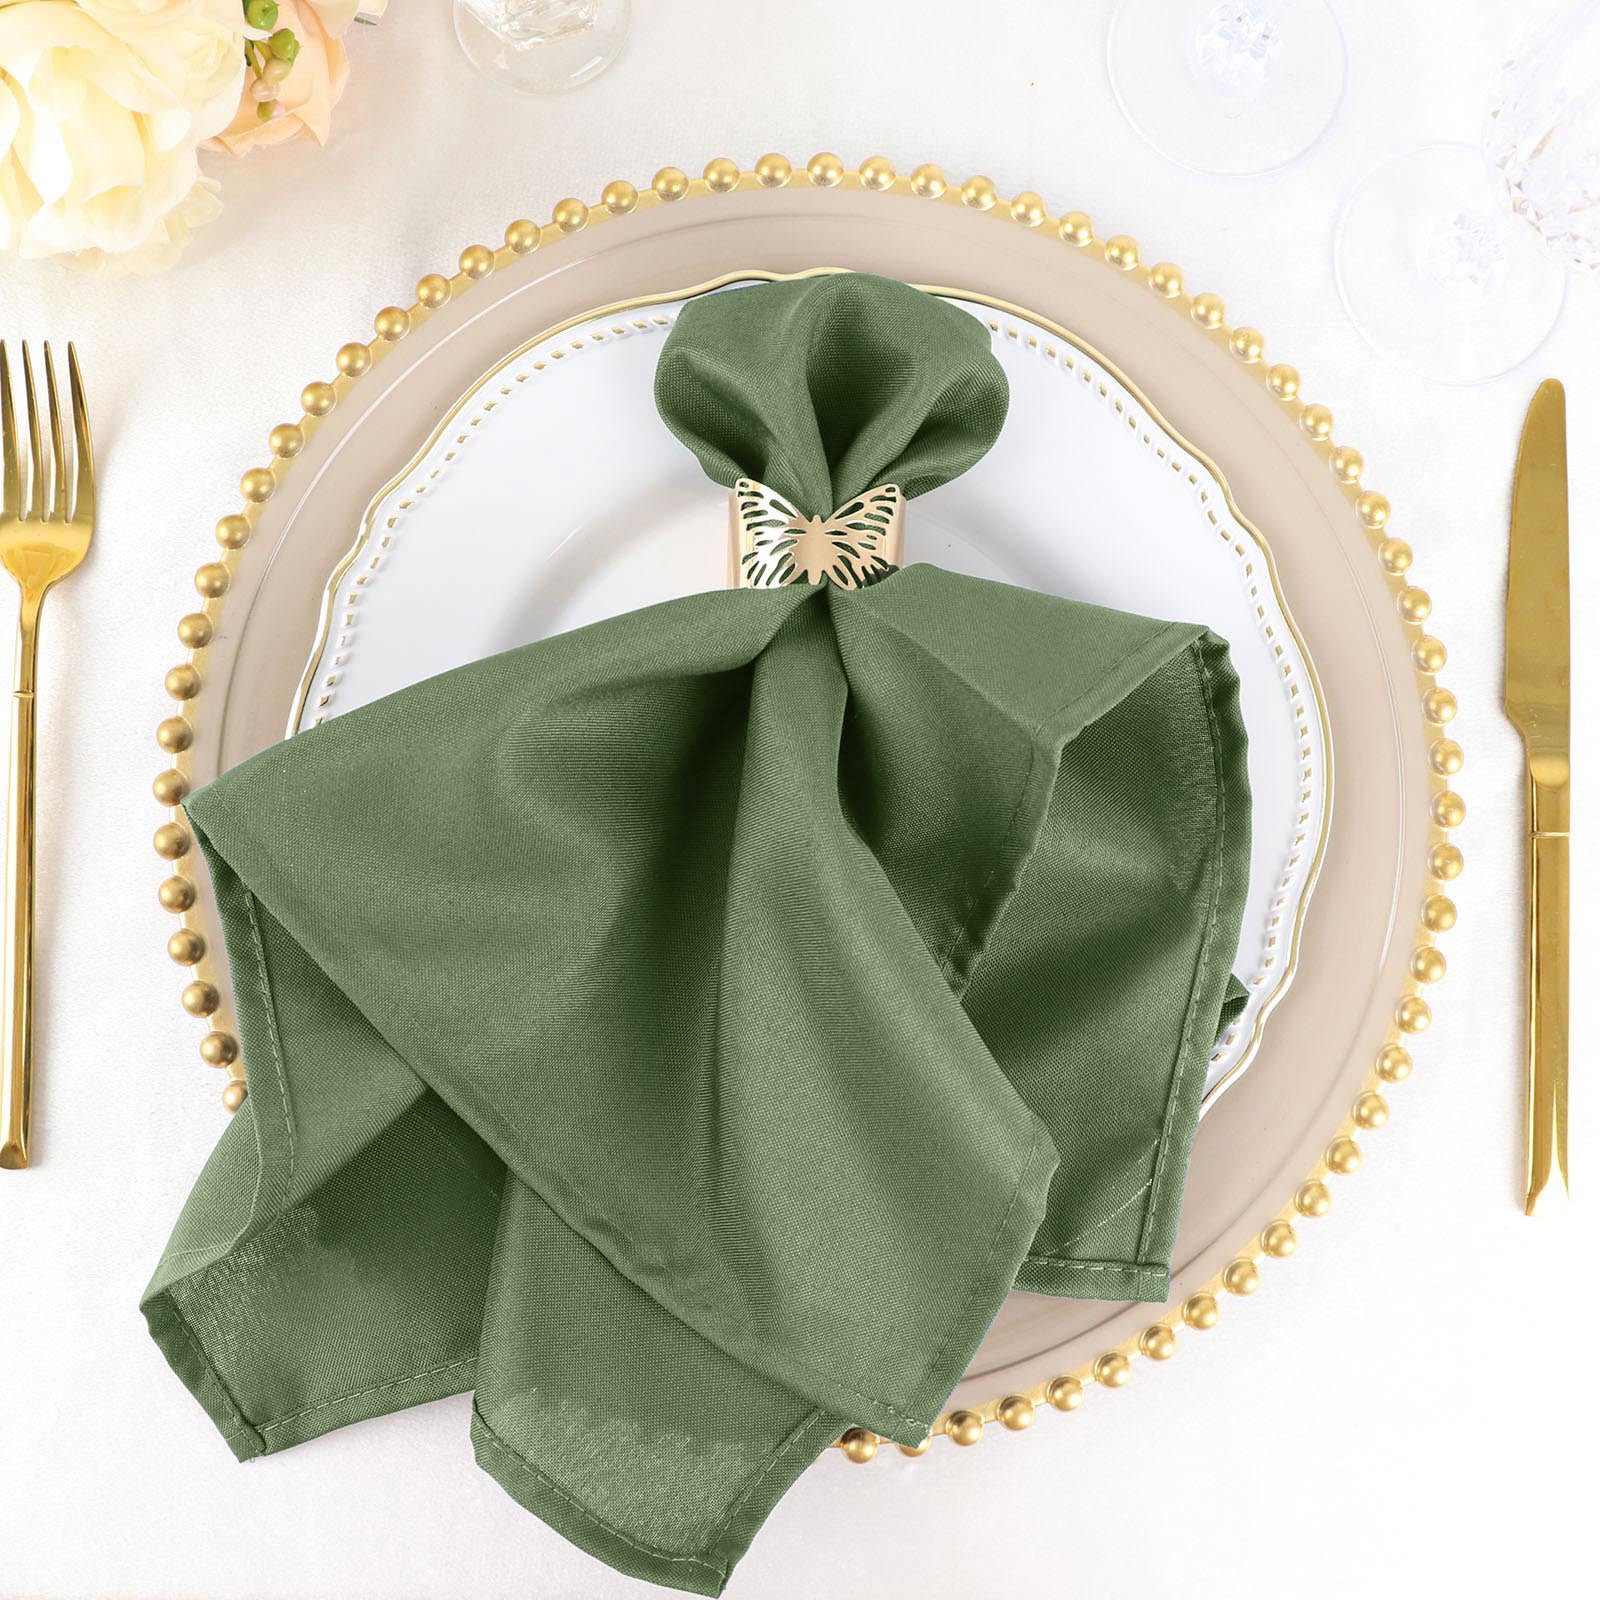 Sophistication and Sustainability for any Event, Restaurant and Banquet: Wholesale  Linen Napkins 